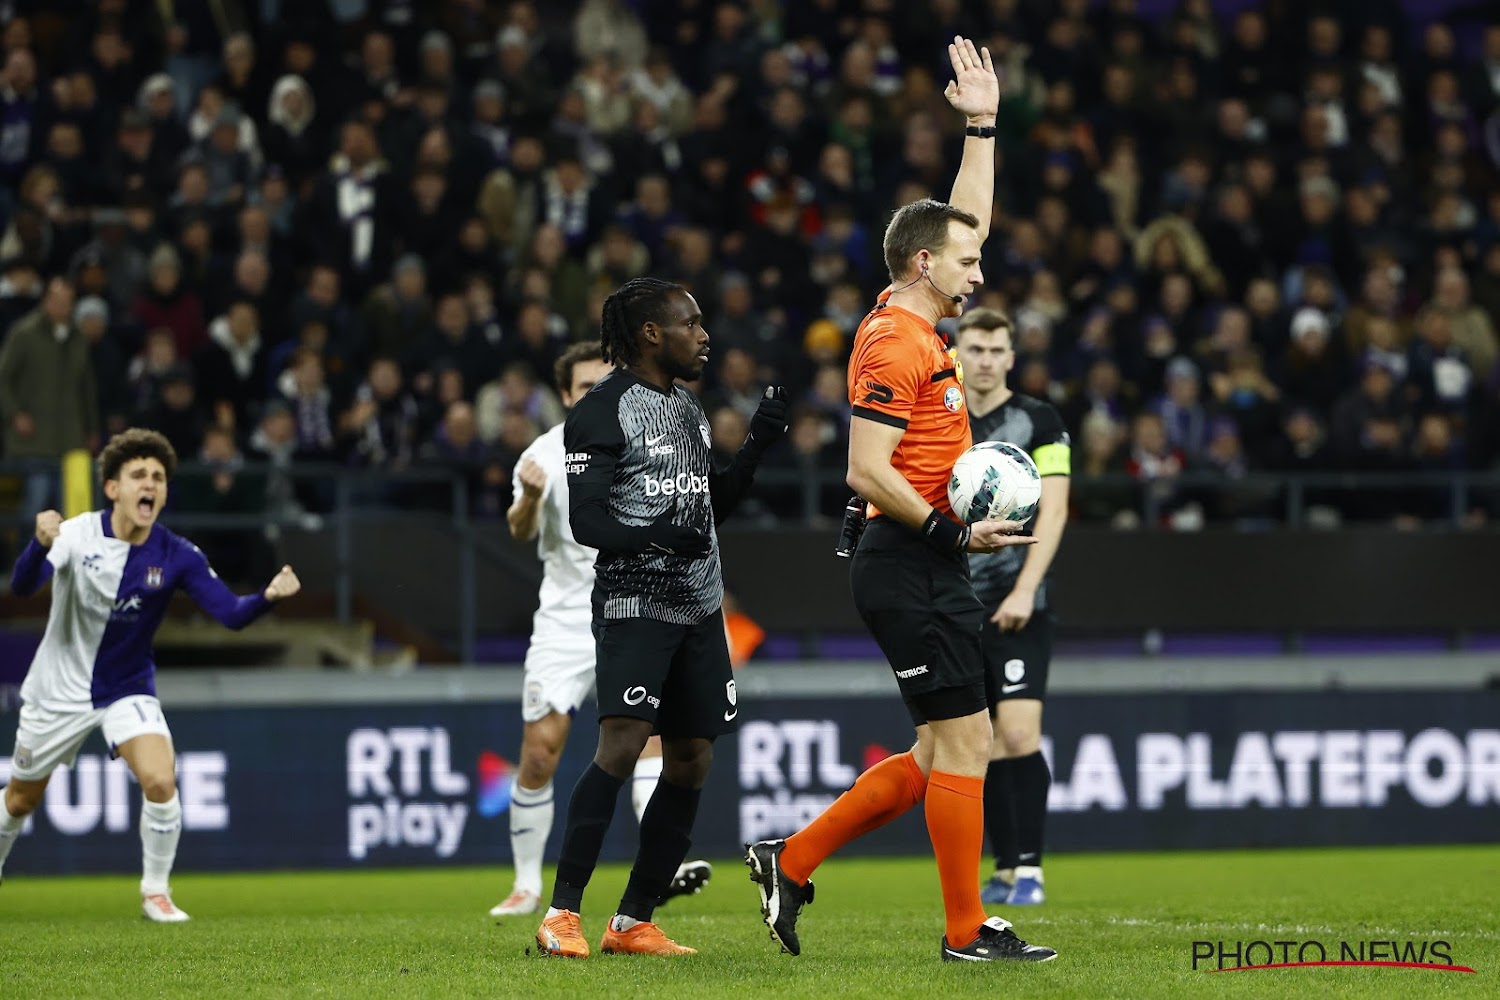 A new episode of “Penalty Gate”: Referee Nathan Verbomen and Video Assistant Referee Jan Potterberg give their side of the story – Football News